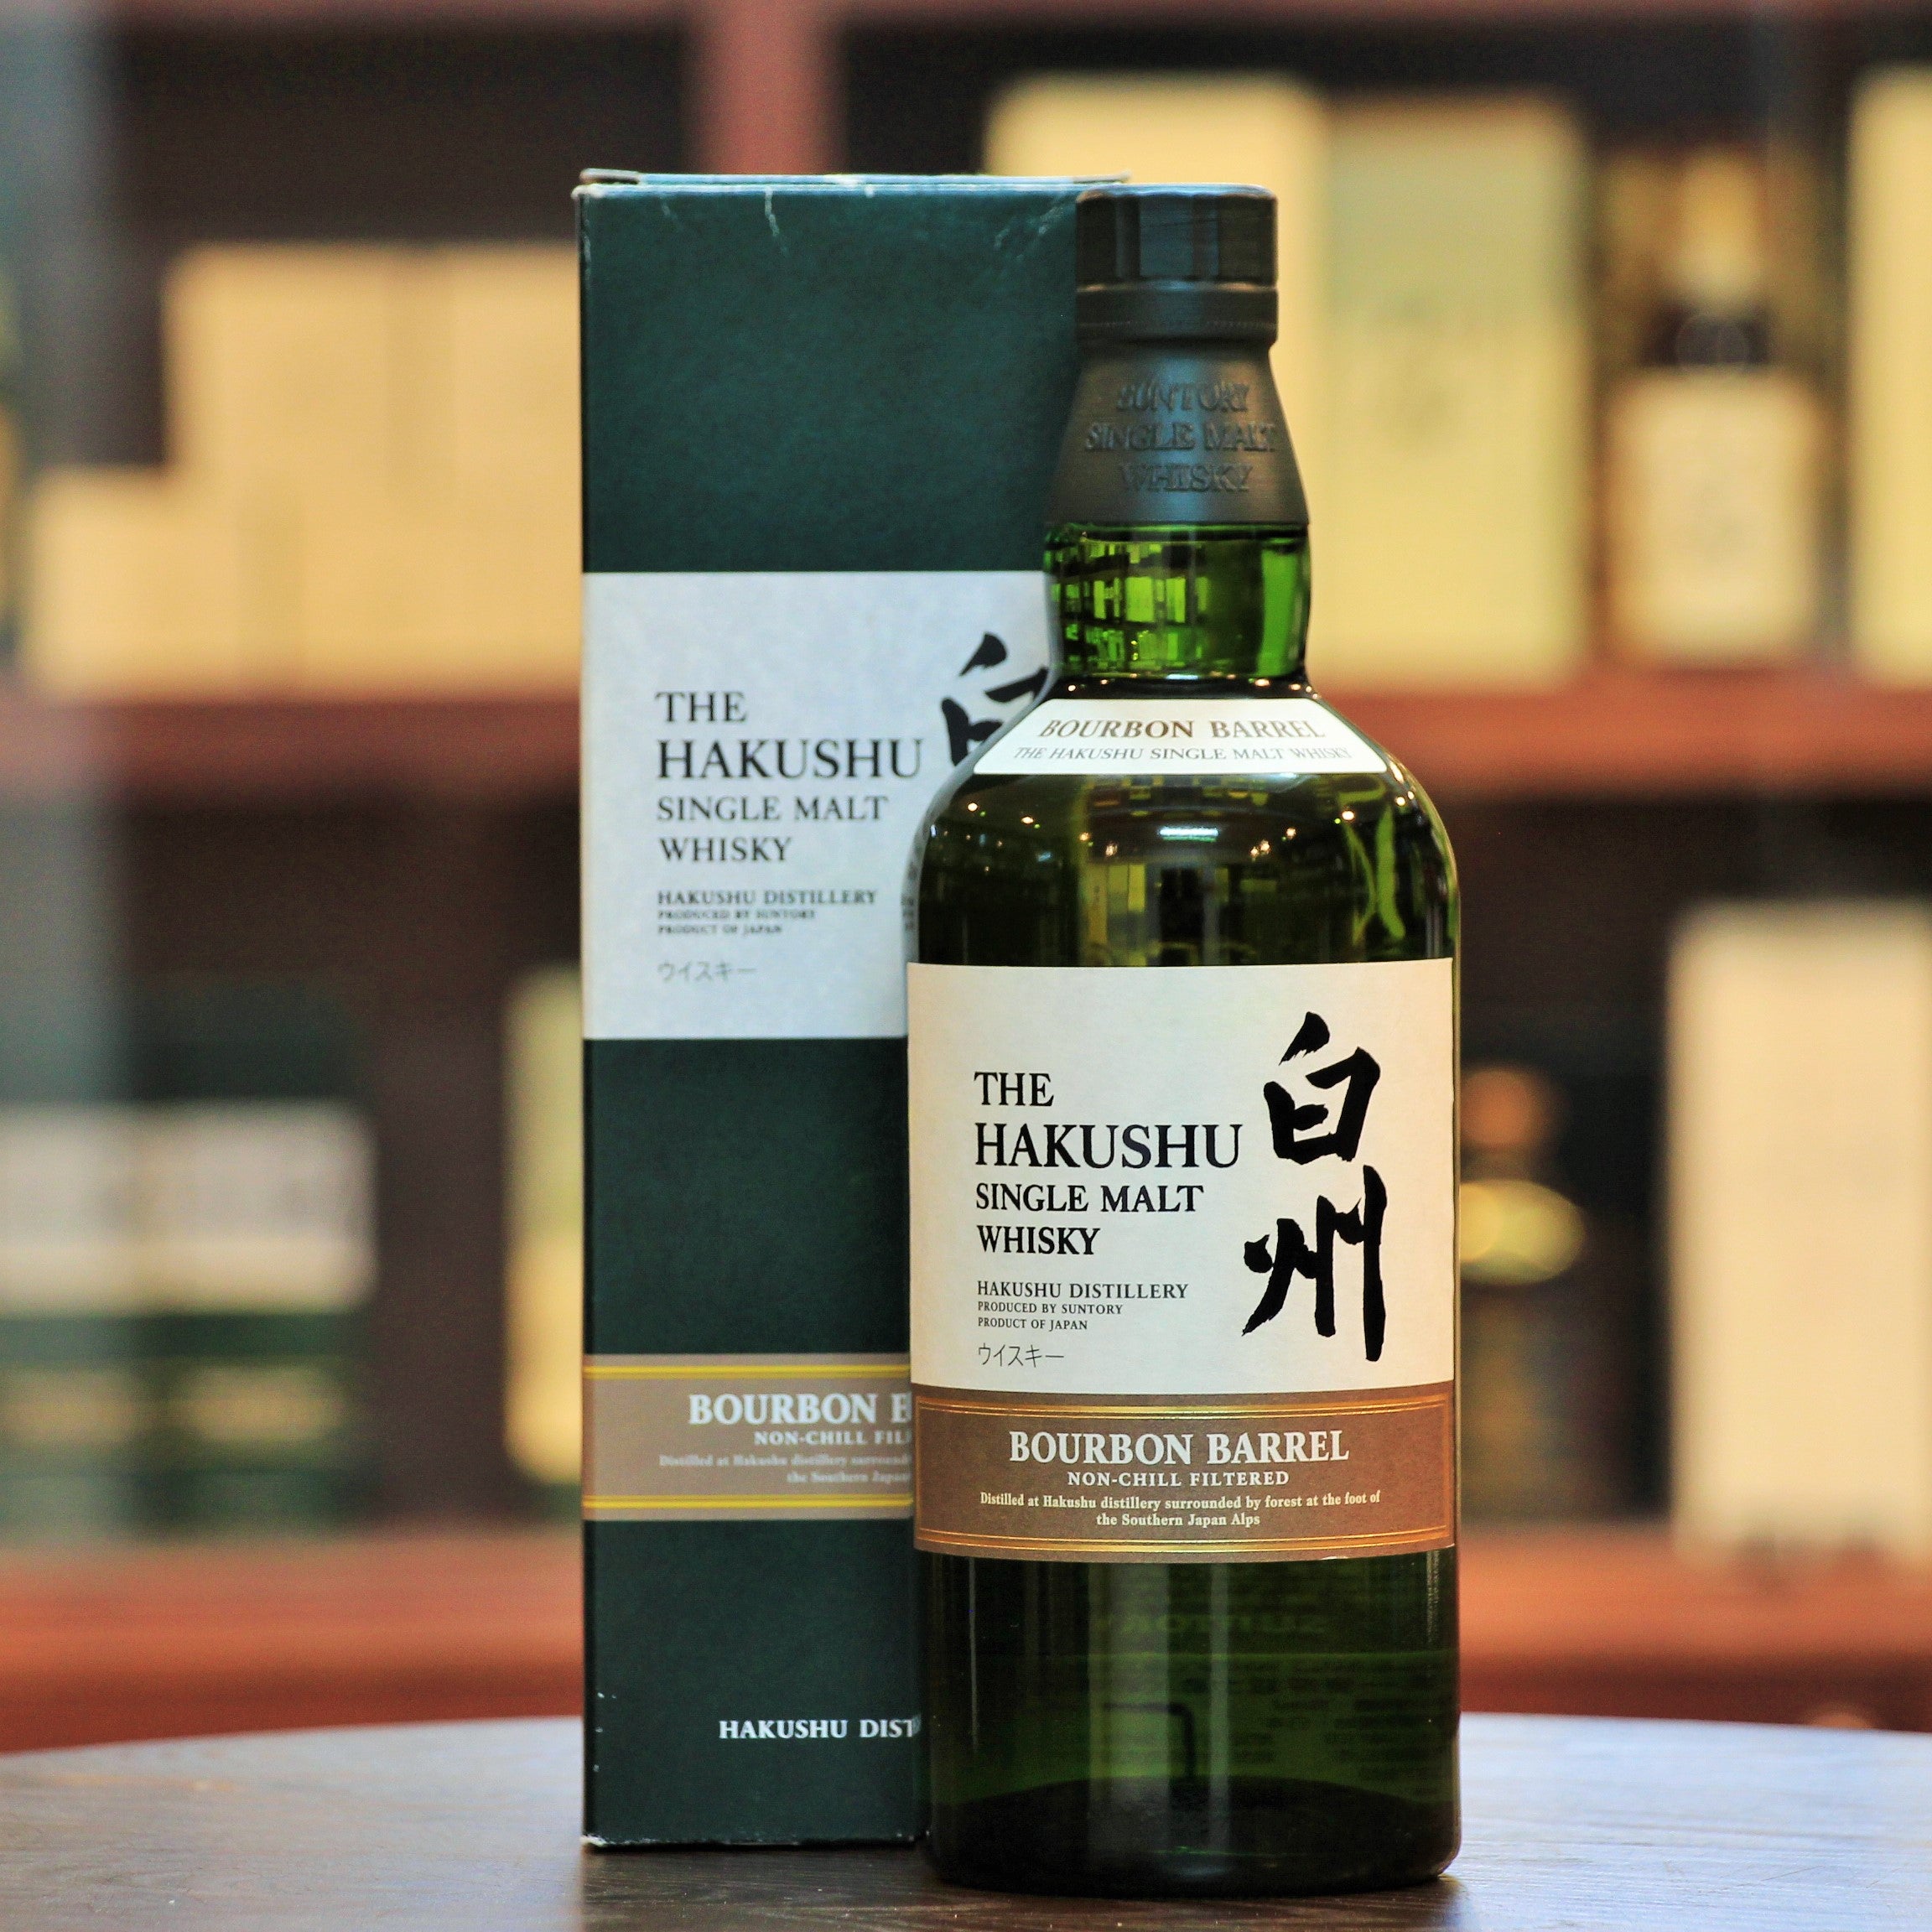 Hakushu Bourbon Barrel Single Malt Whisky, Aged entirely in first fill bourbon barrels, this is a unique product from the lightly peated Hakushu. Discontinued.